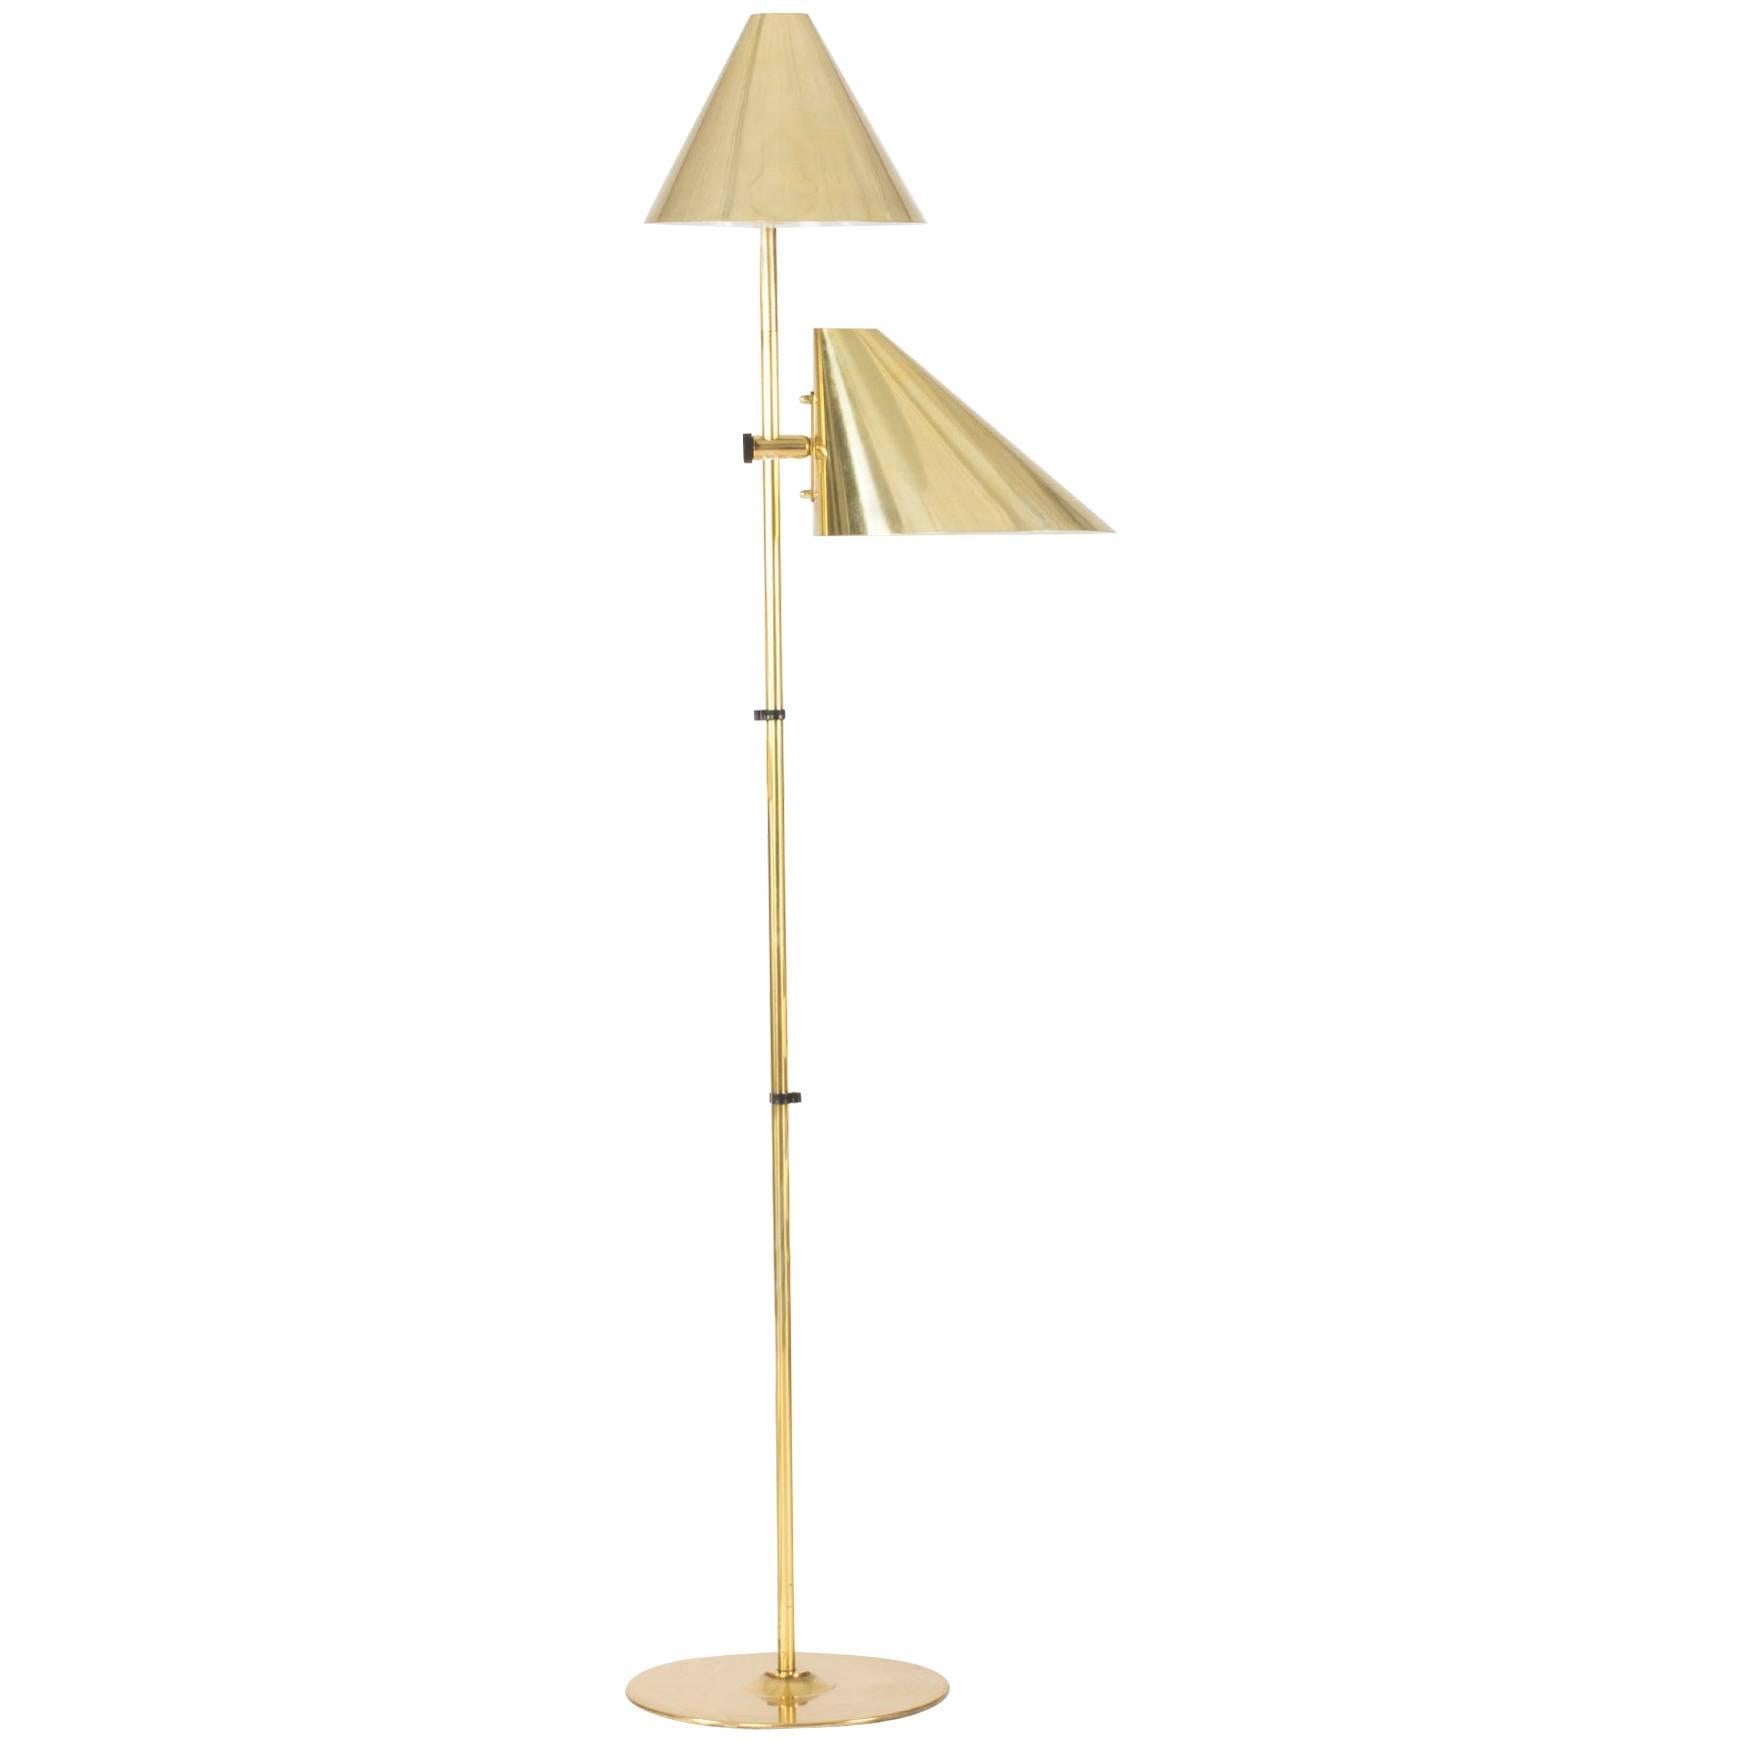 Double Shade Brass Floor Lamp by Hans Agne Jakobsson